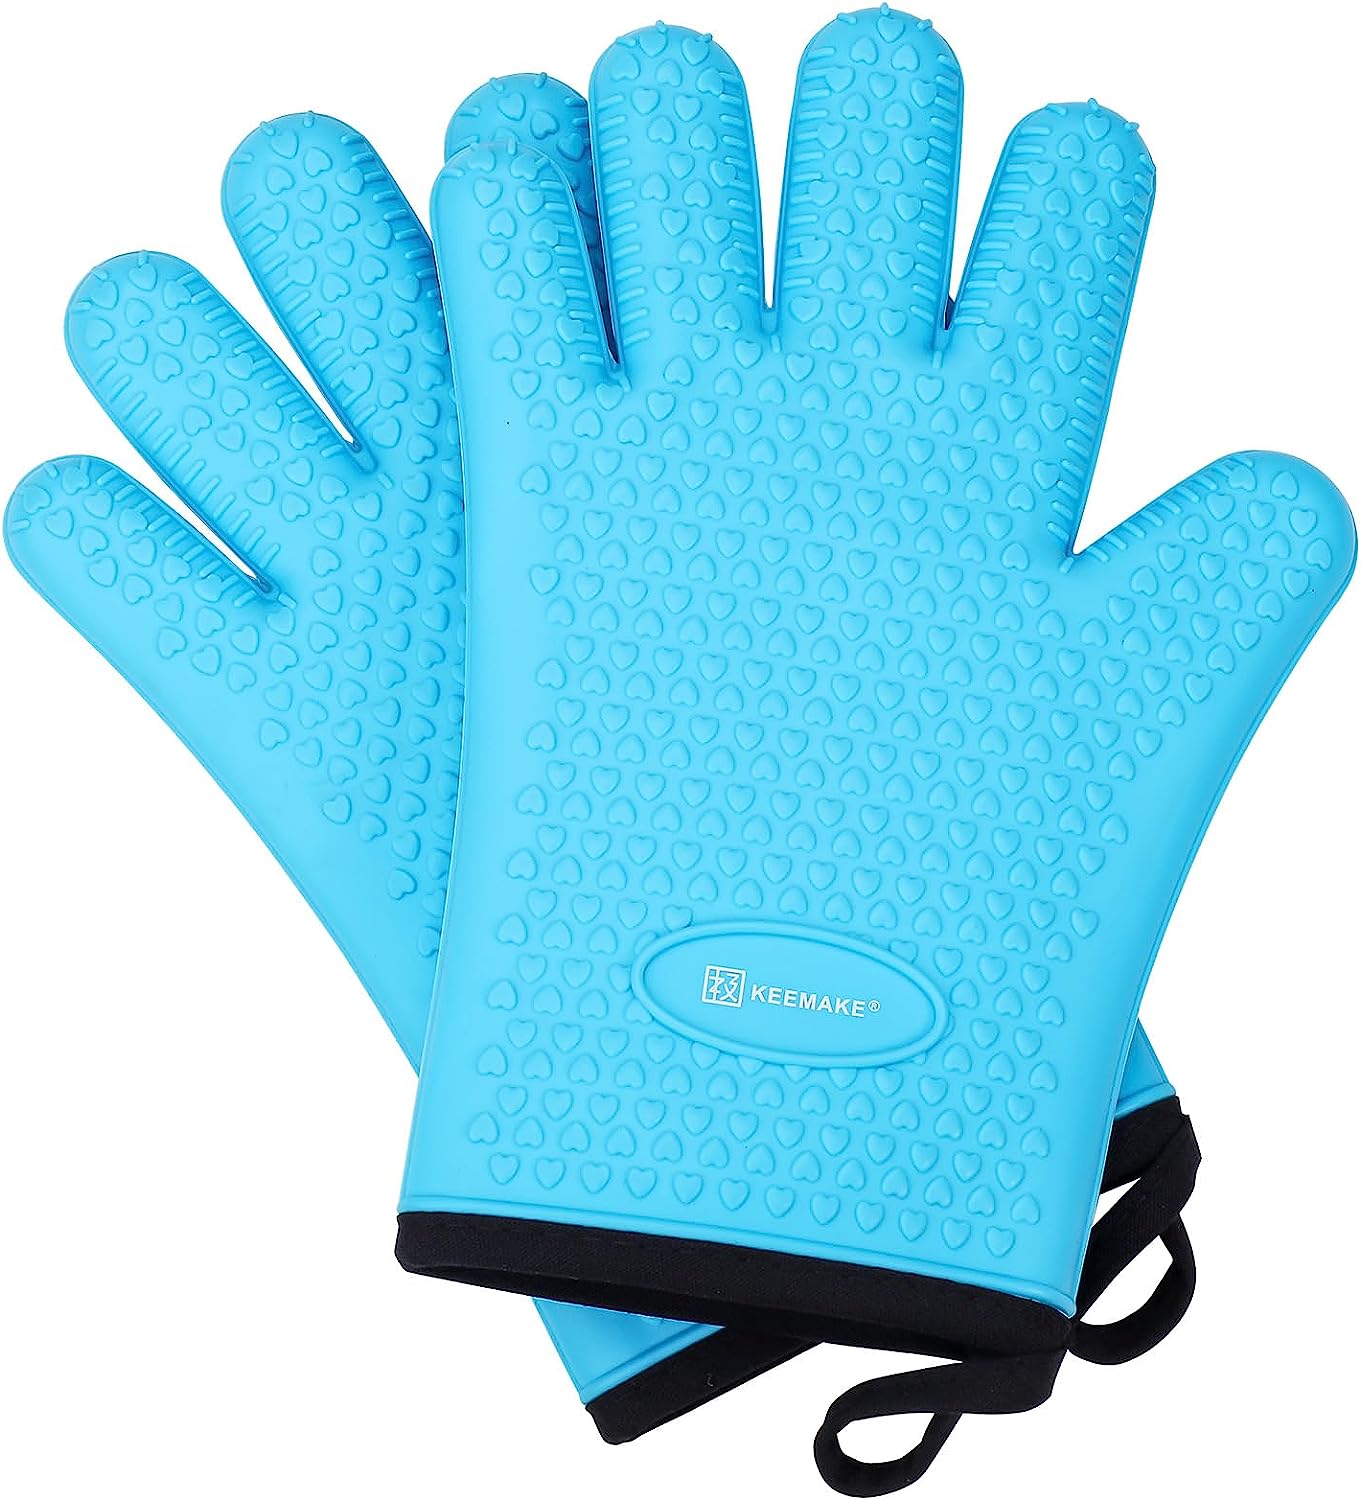 KEEMAKE Silicone Oven Mitts, Heat Resistant Gloves for Grilling Outside-Blue